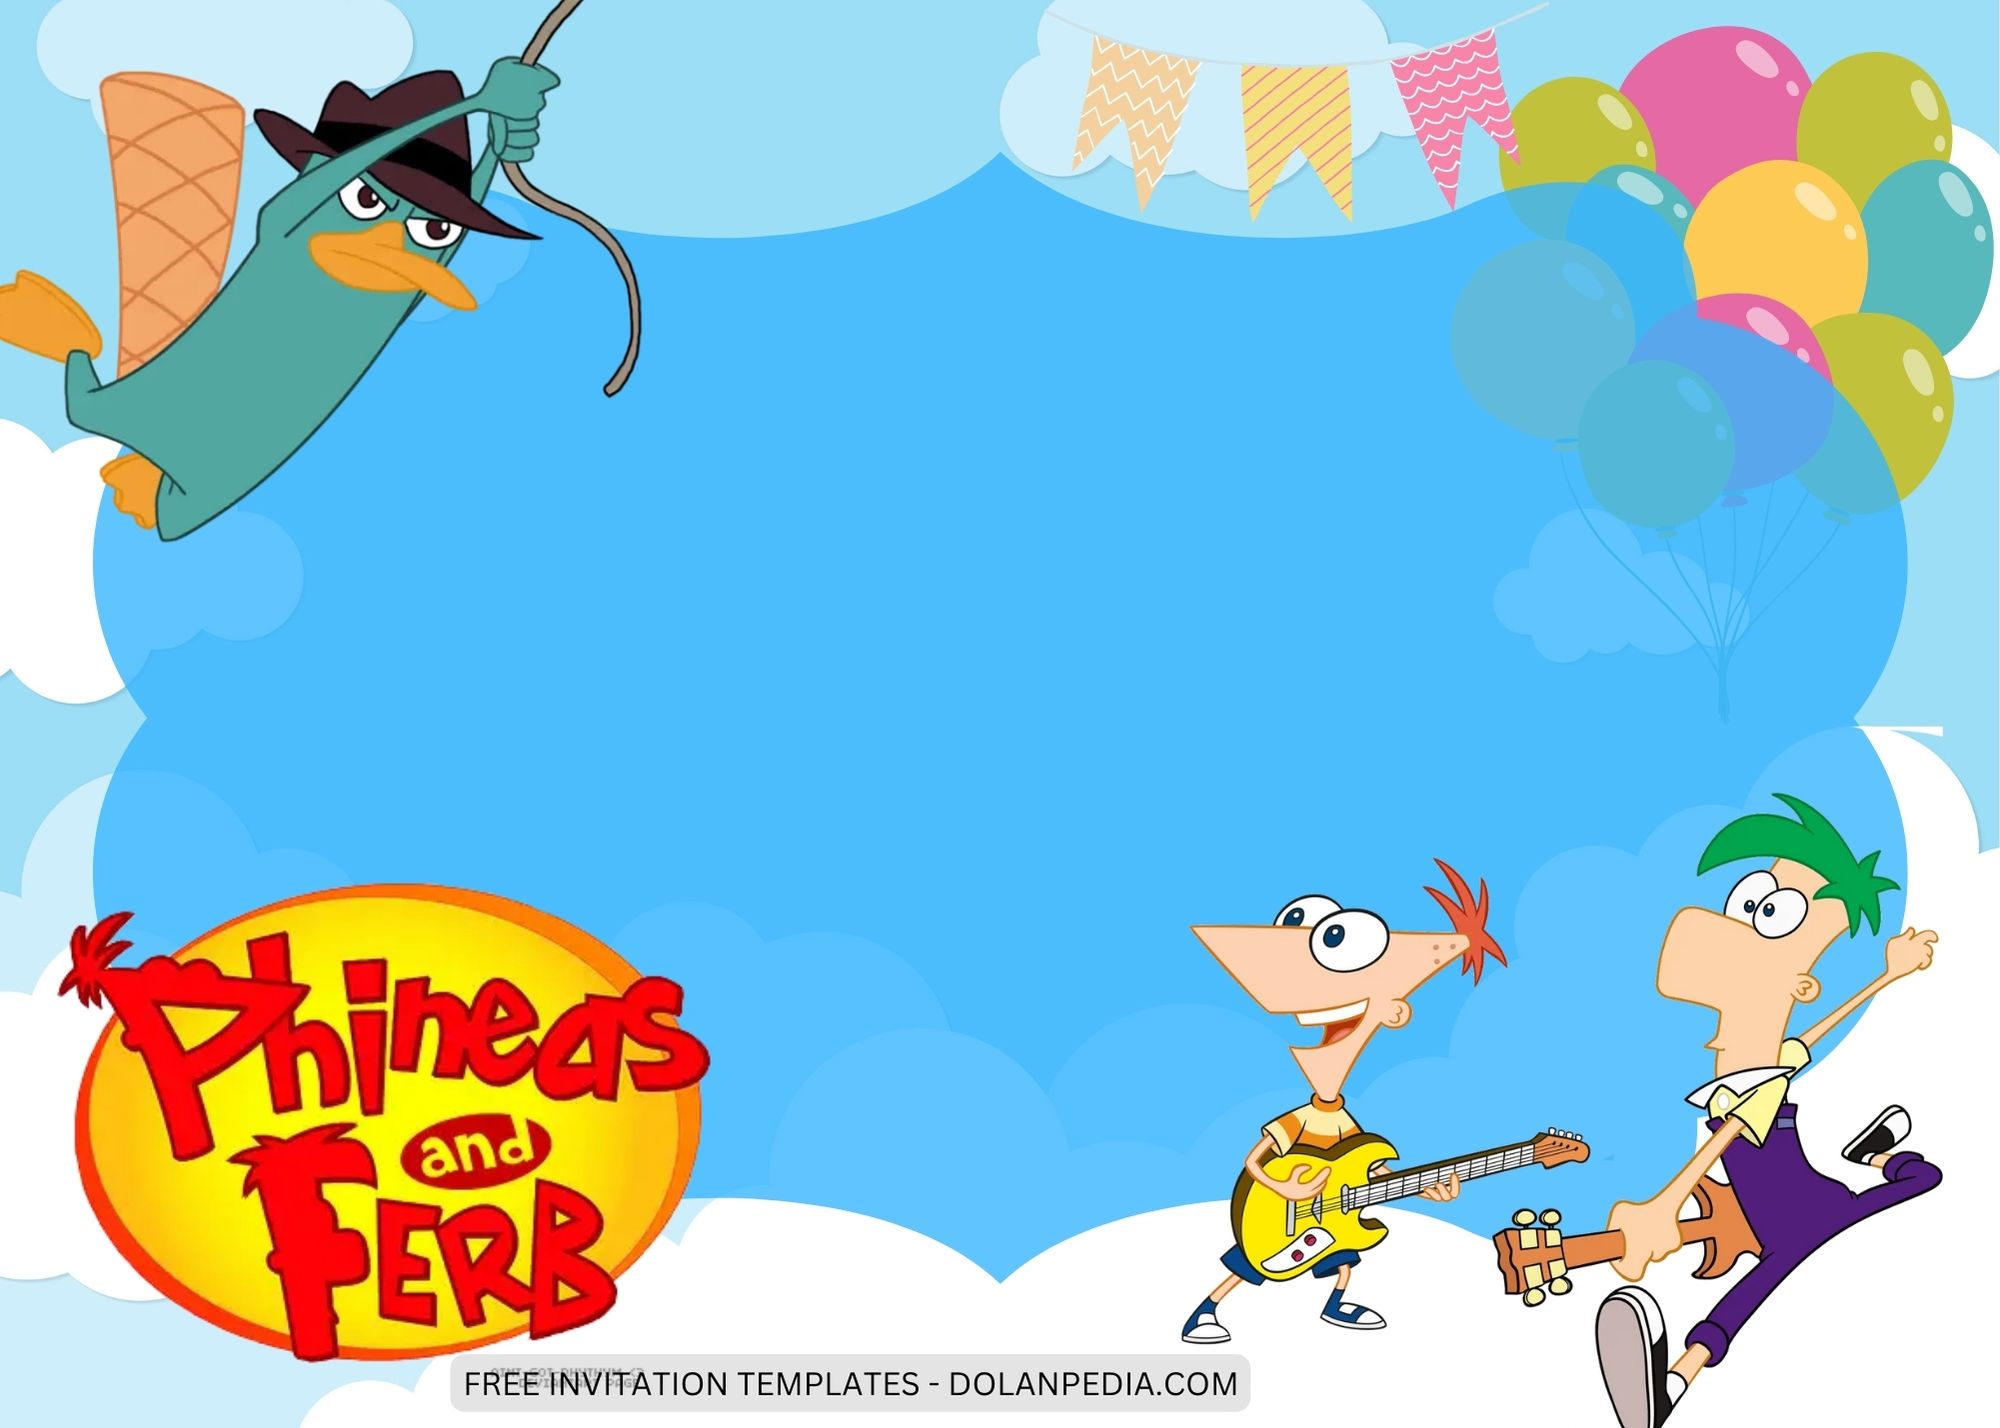 Blank Phineas and Ferb Birthday Invitation Templates Two